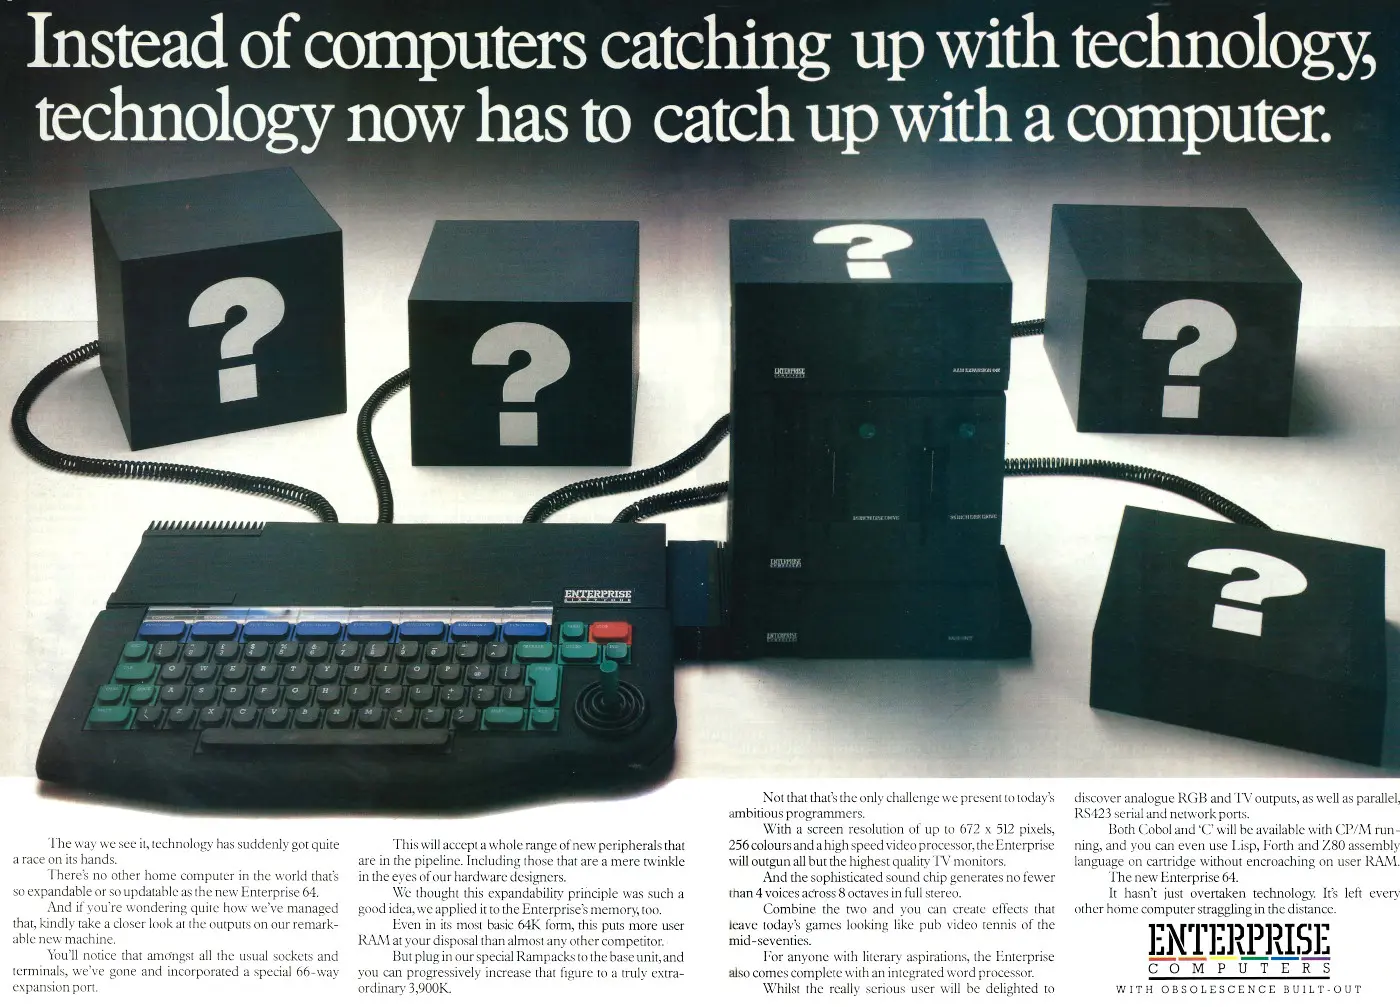 Enterprise/Elan Advert: Instead of computers catching up with technology, technology now has to catch up with a computer, from Your Computer, April 1985